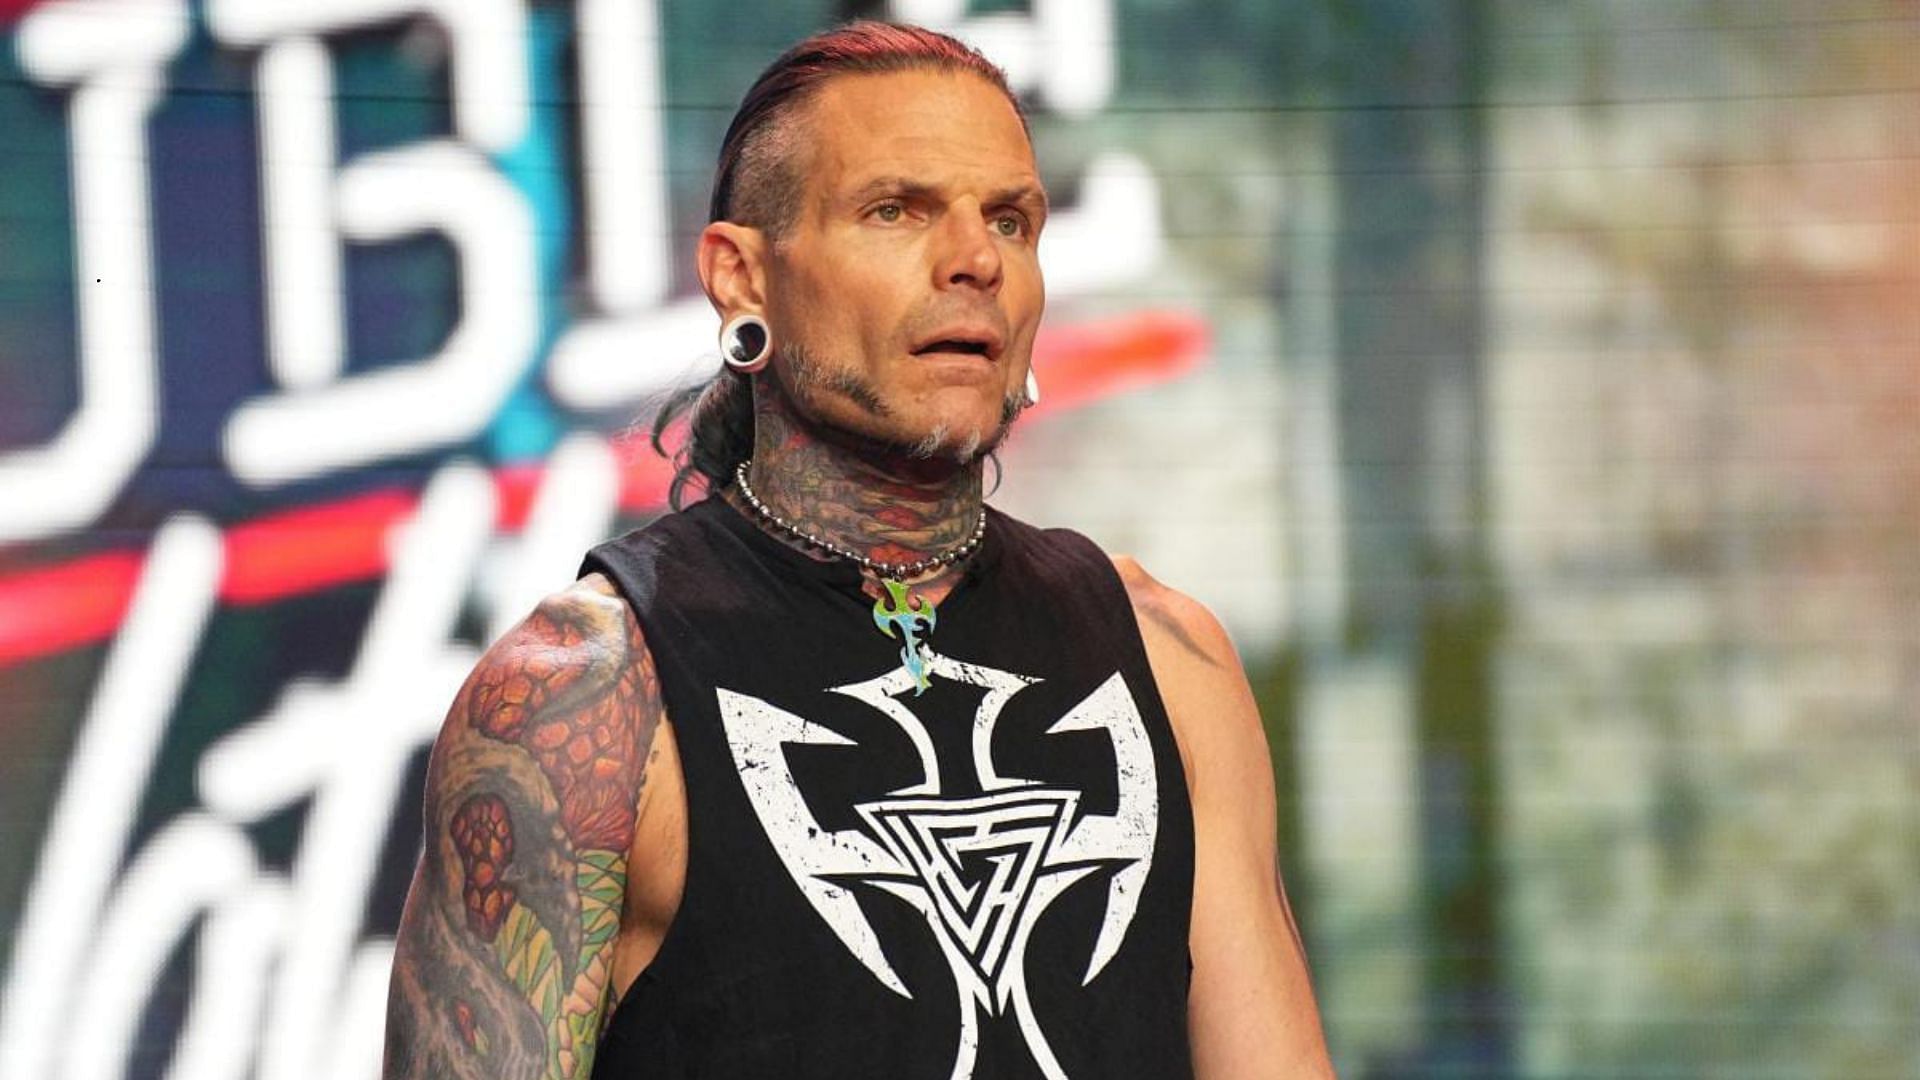 Jeff Hardy is a former WWE Tag Team Champion